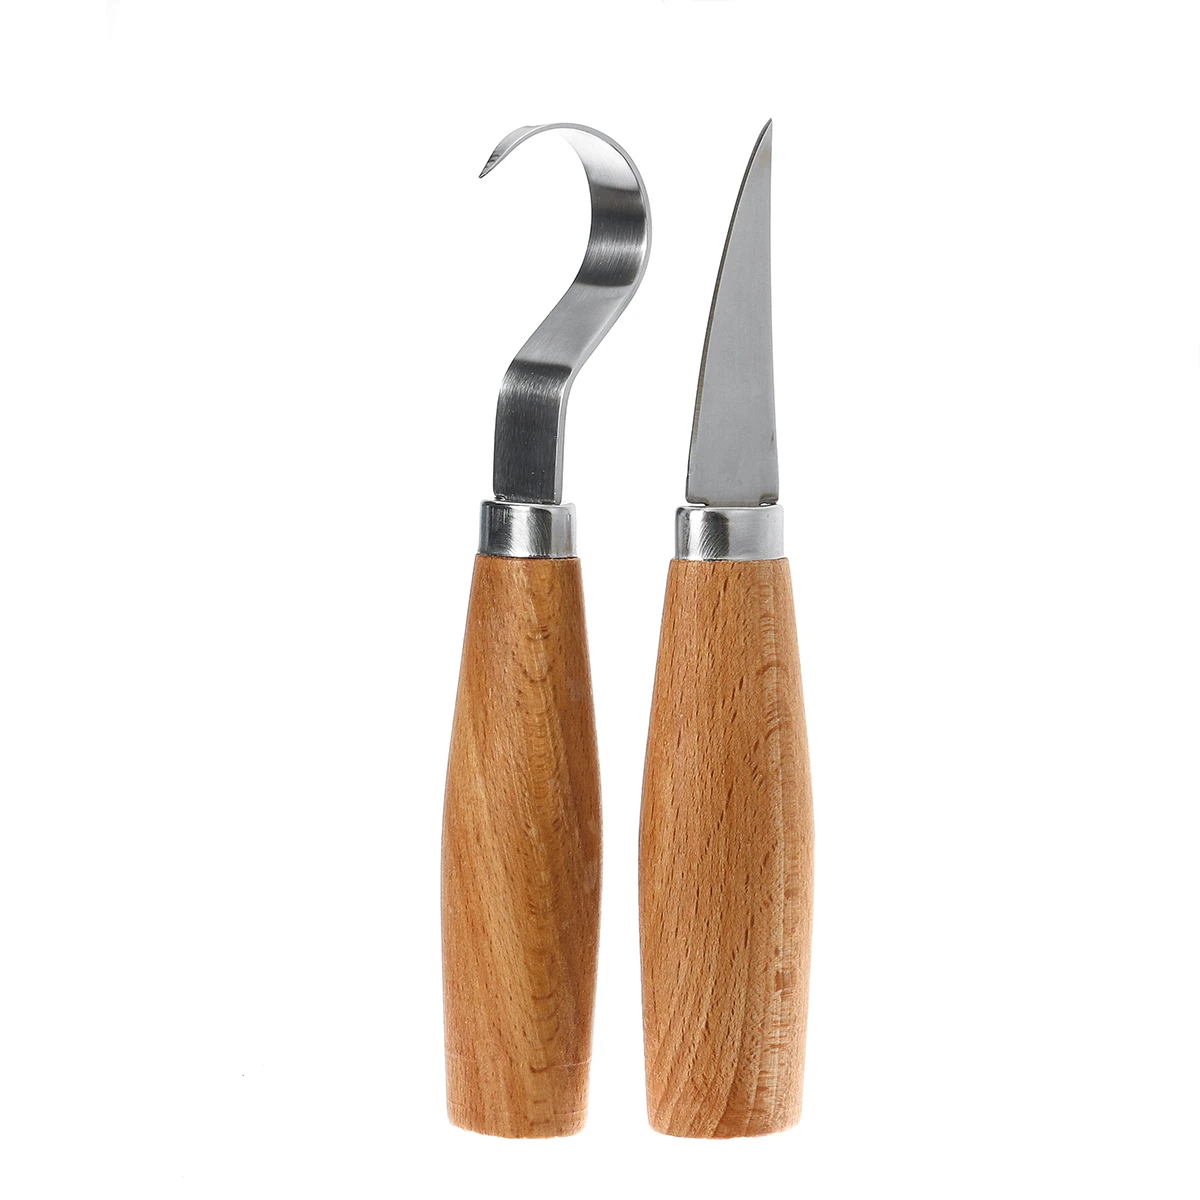 Wood Carving Knife Chisel Woodworking Cutter Hand Tool Set Woodcarving Peeling Sculptural Spoon Hooked Carving Wood Carving